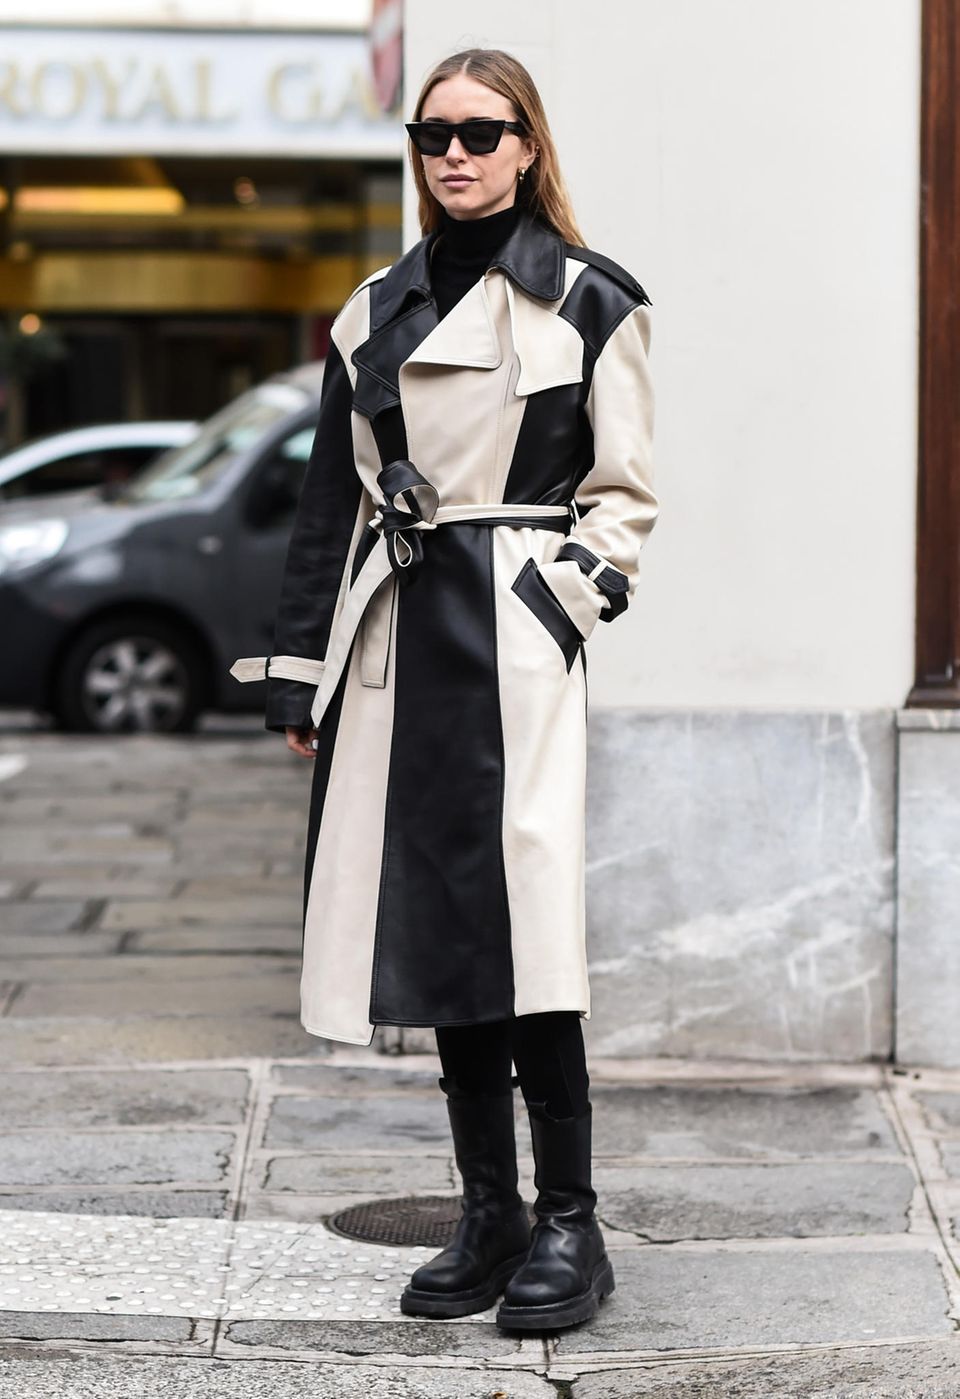 Patchwork coats: This is how we style the hottest trend of the fall season